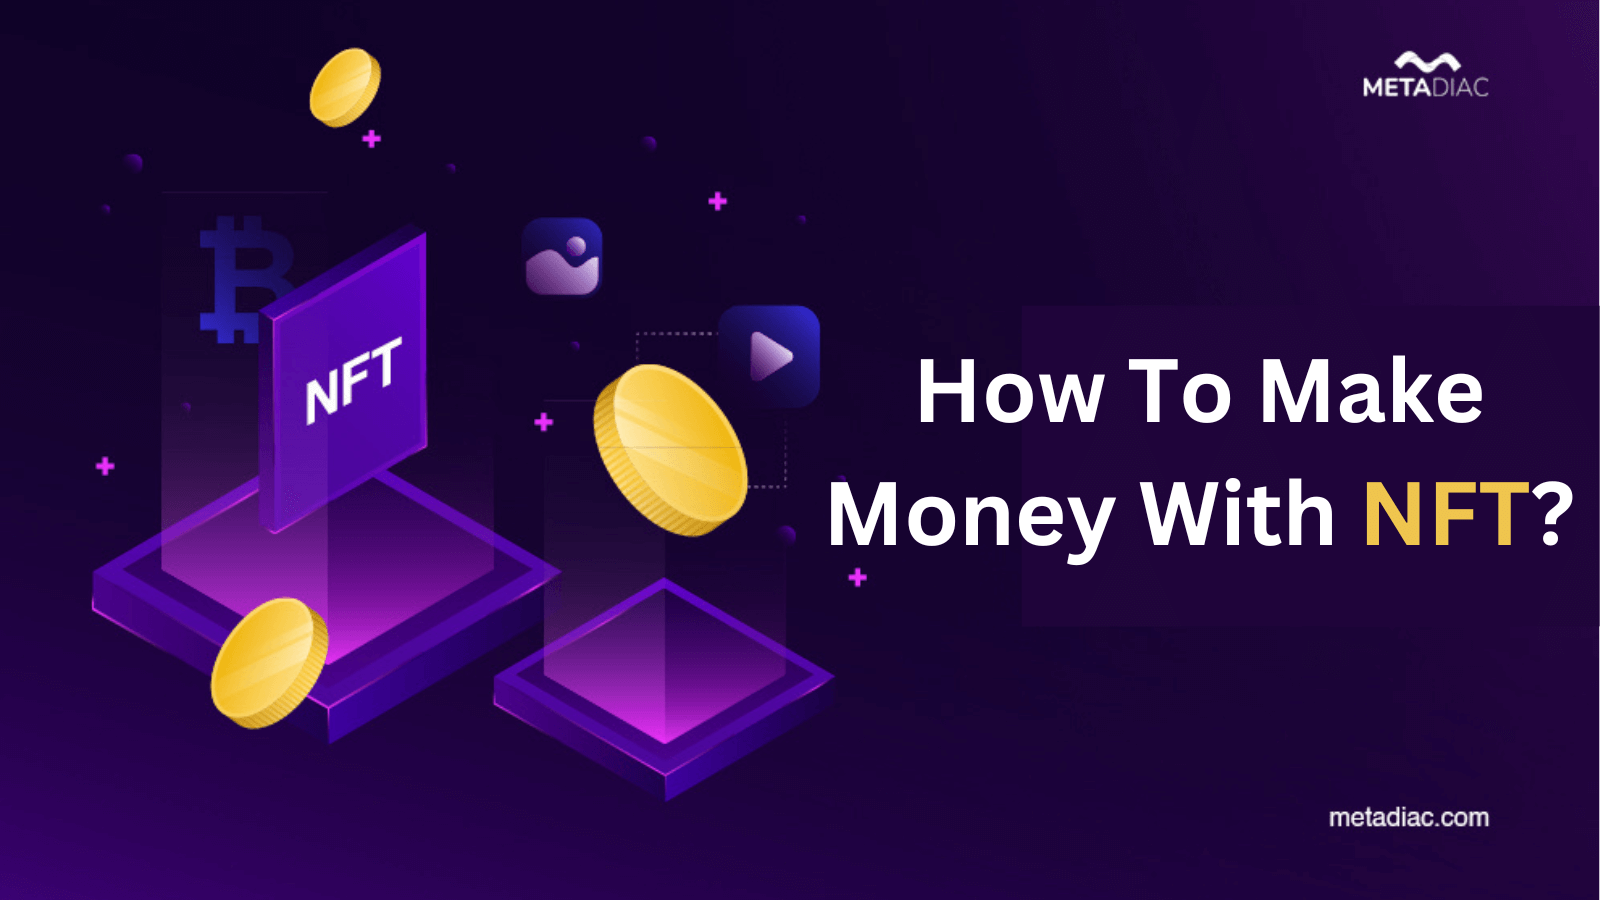 how-to-make-money-with-nft